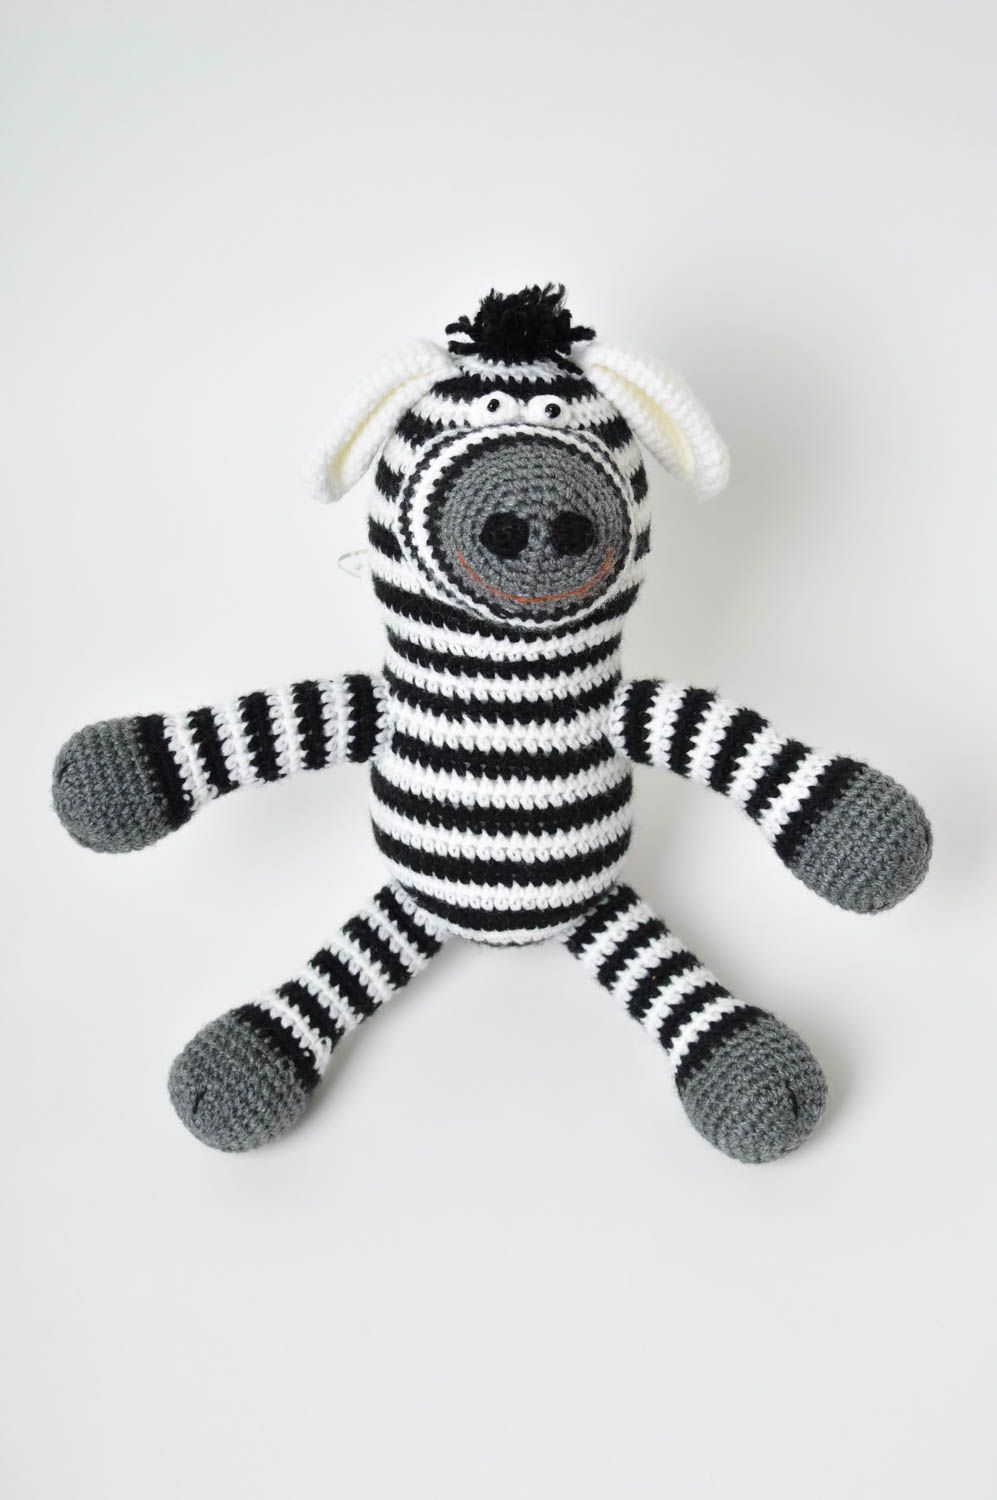 Handmade toy small zebra soft toy decorative crocheted toy striped crocheted toy photo 3